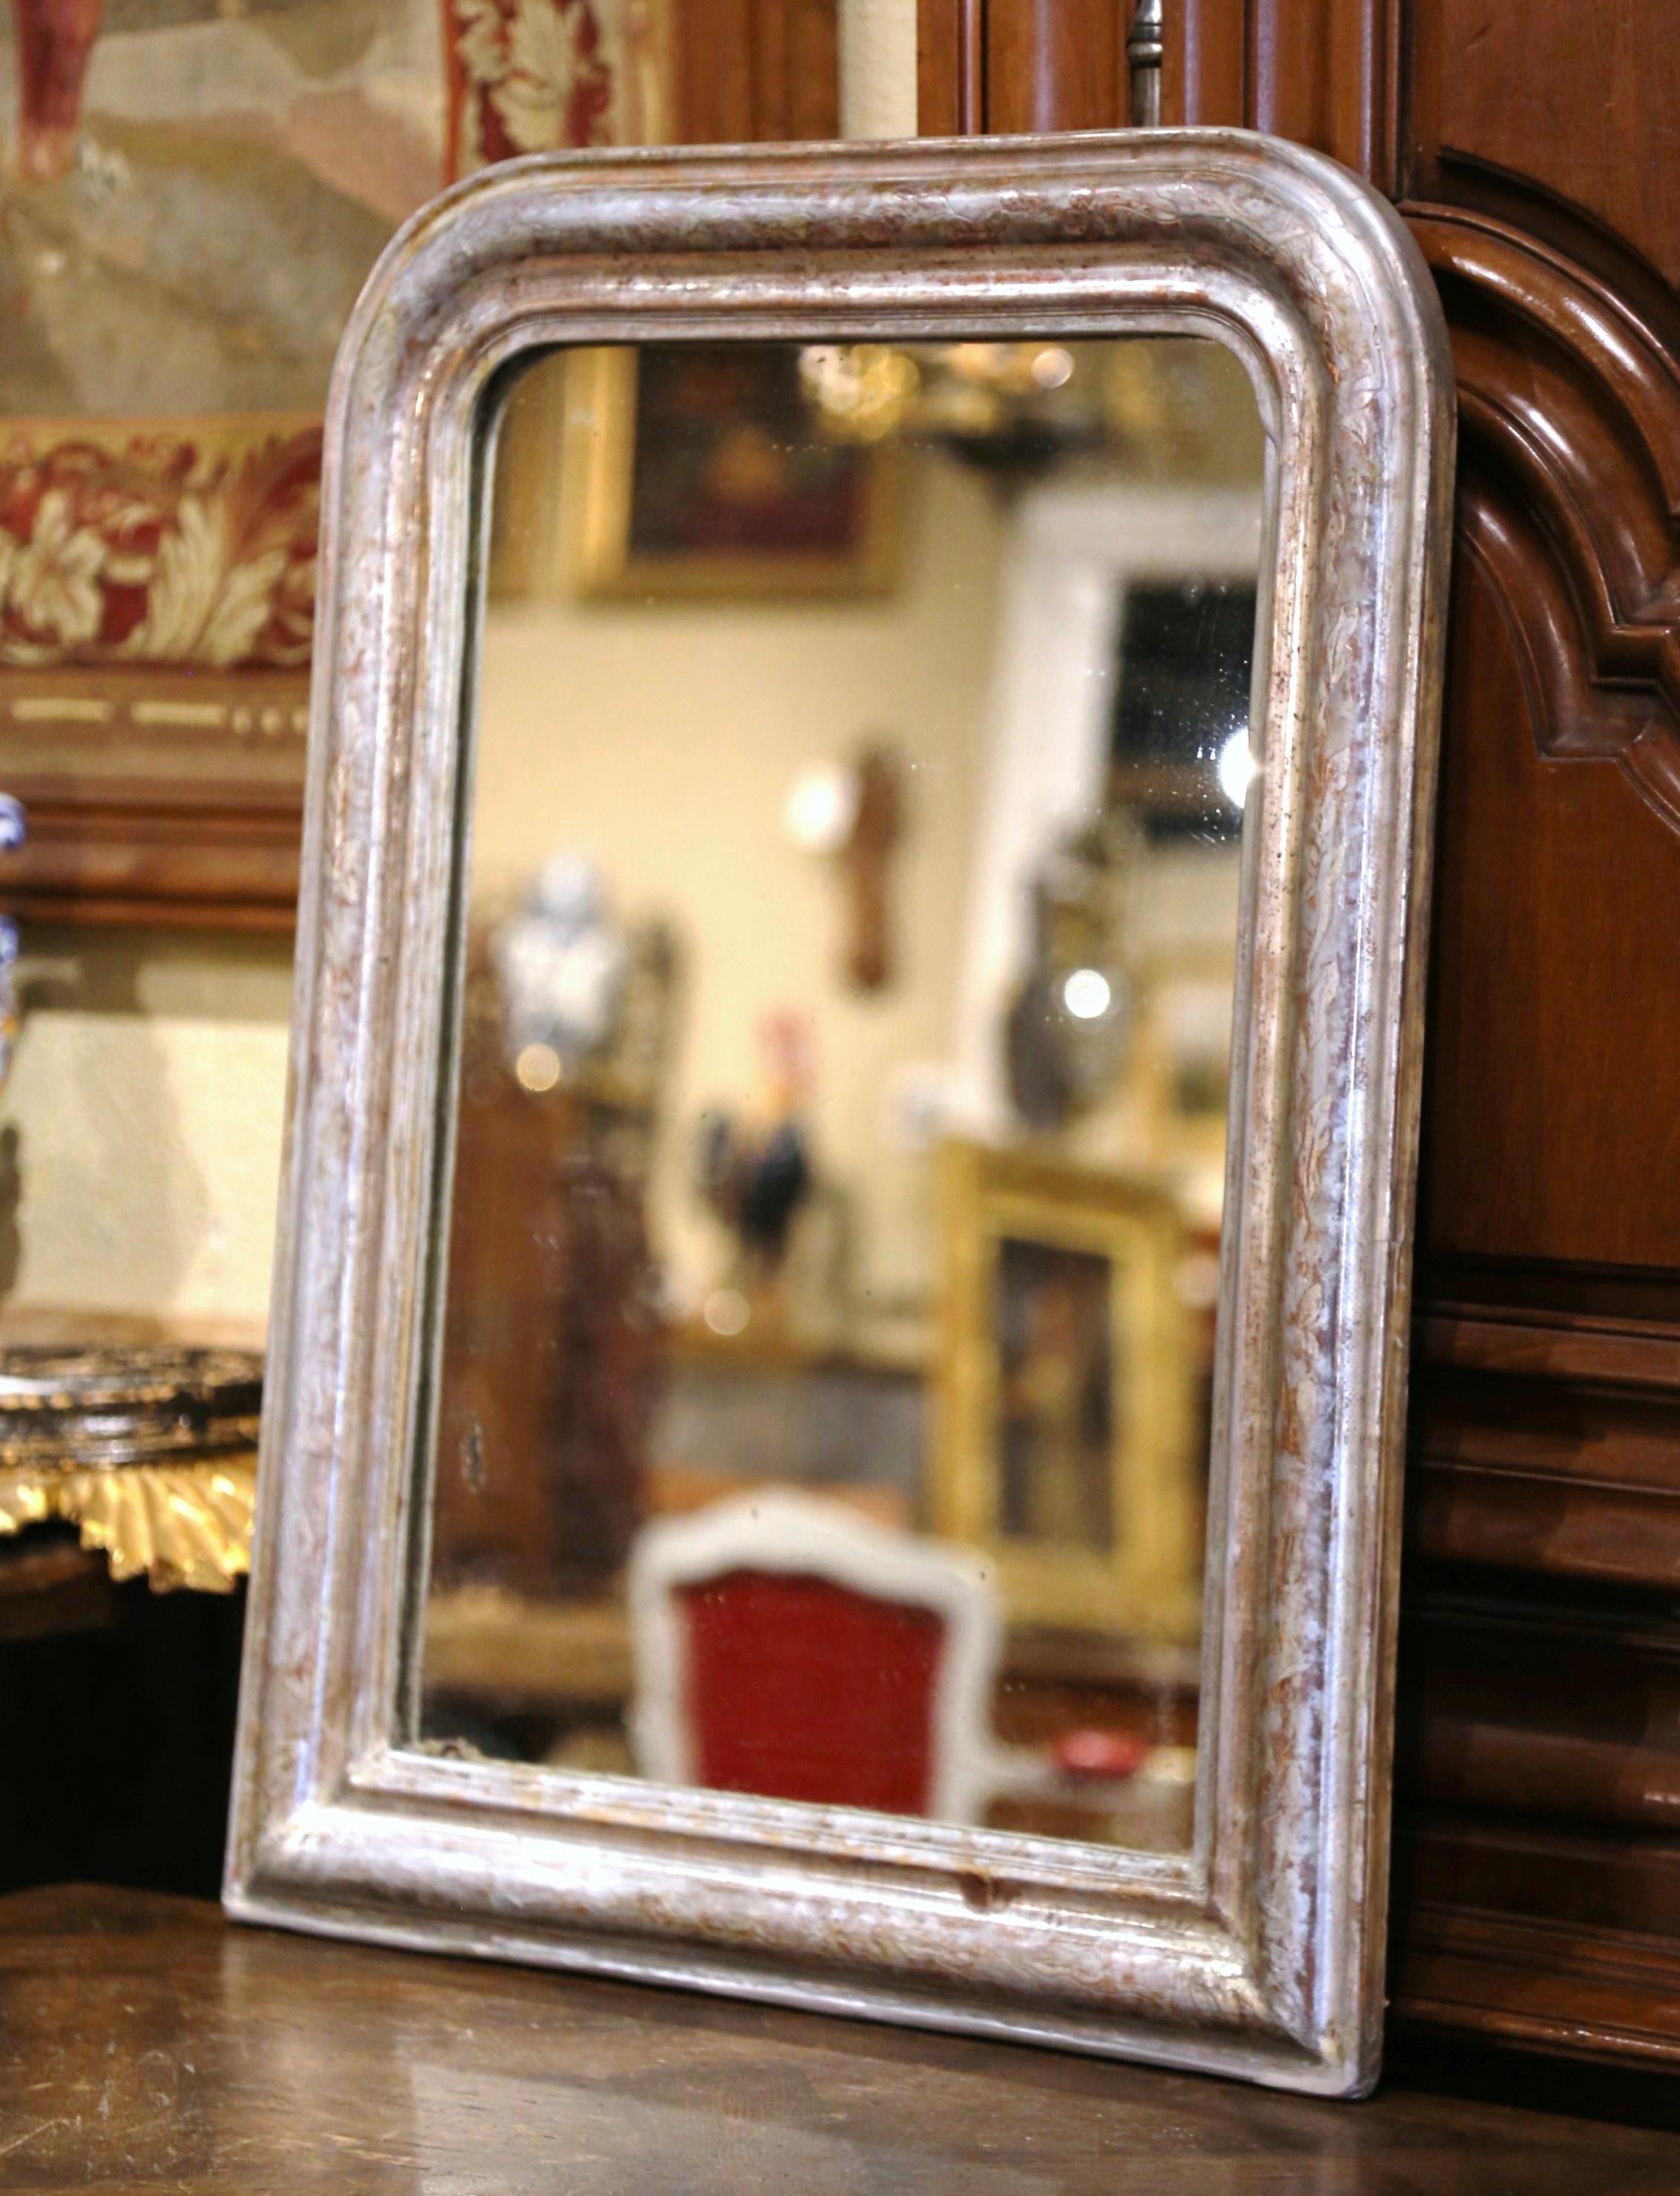 Decorate a powder room or bedroom with this elegant antique mirror. Crafted in the Burgundy region of France, circa 1870, the rectangular mirror has traditional, timeless lines with rounded corners. The frame is decorated with a patinated silver